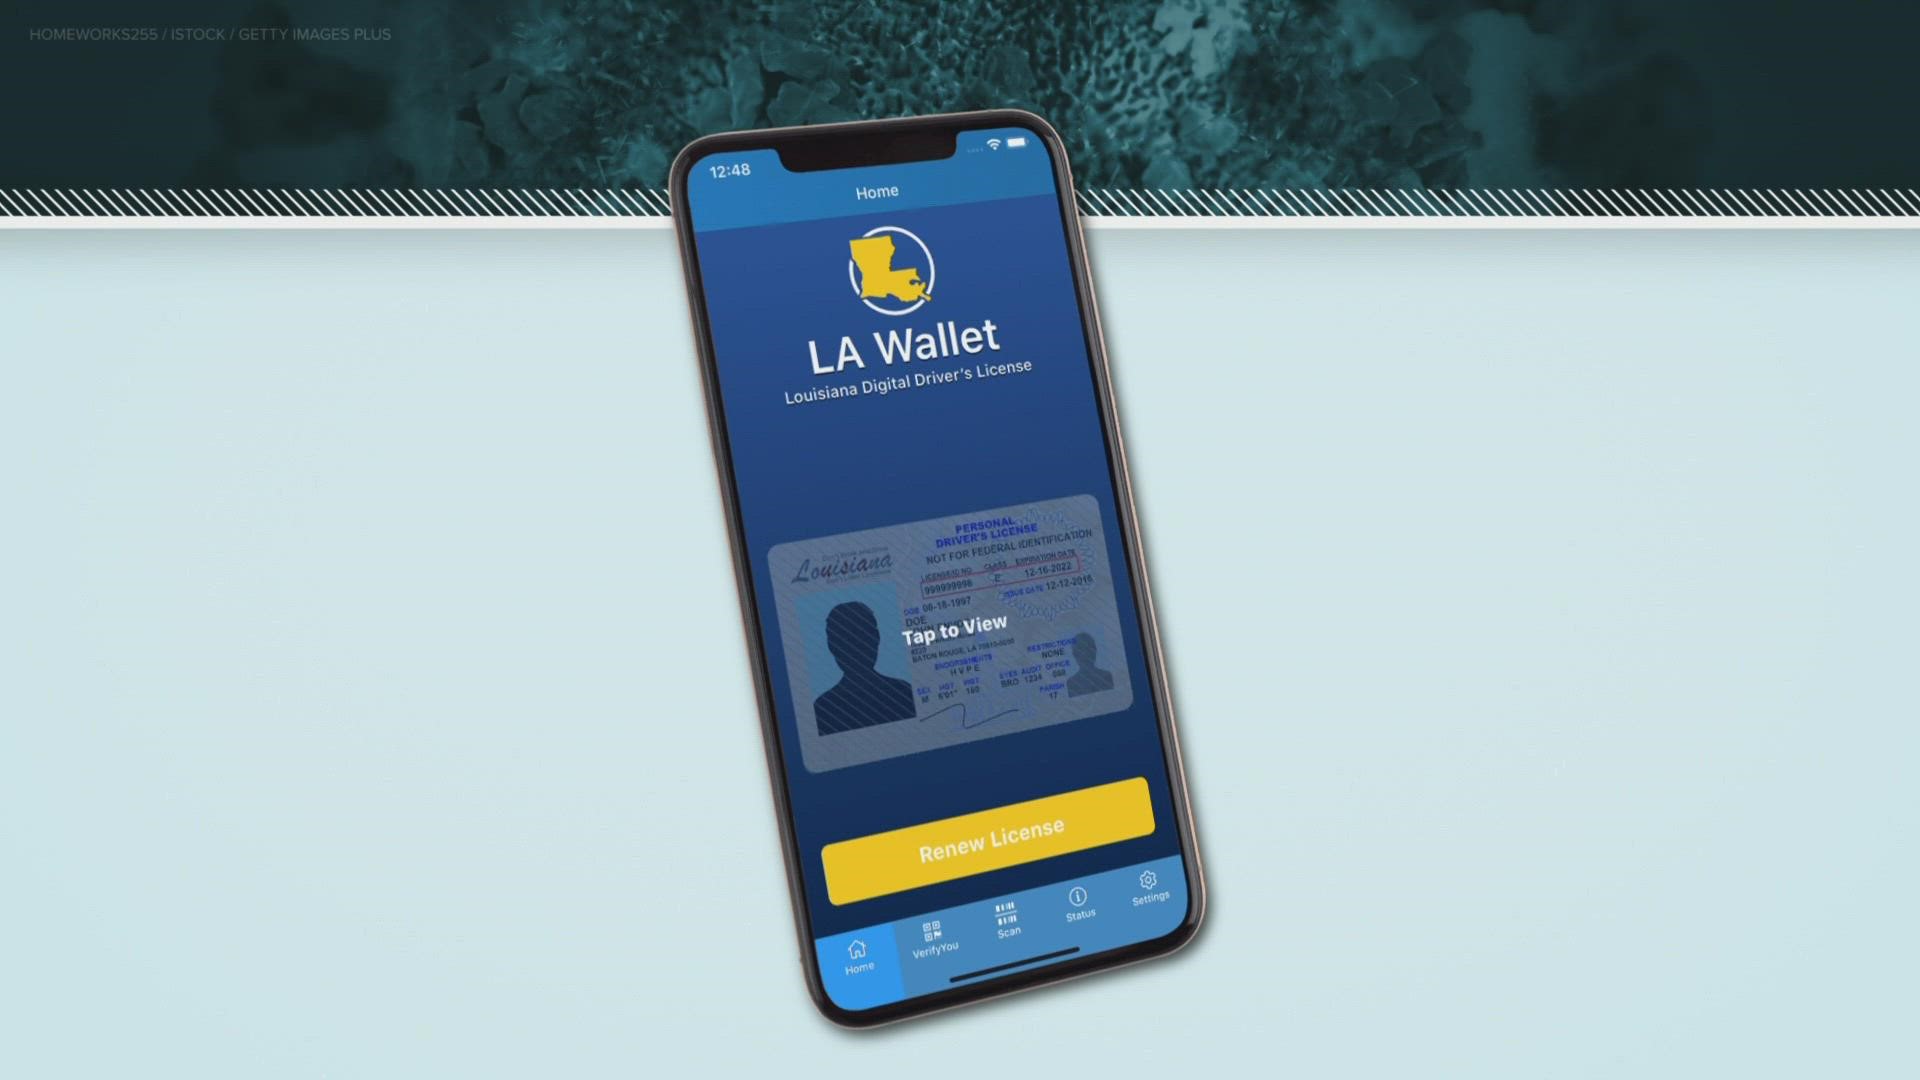 LDWF Hunting & fishing licenses are now on LA Wallet